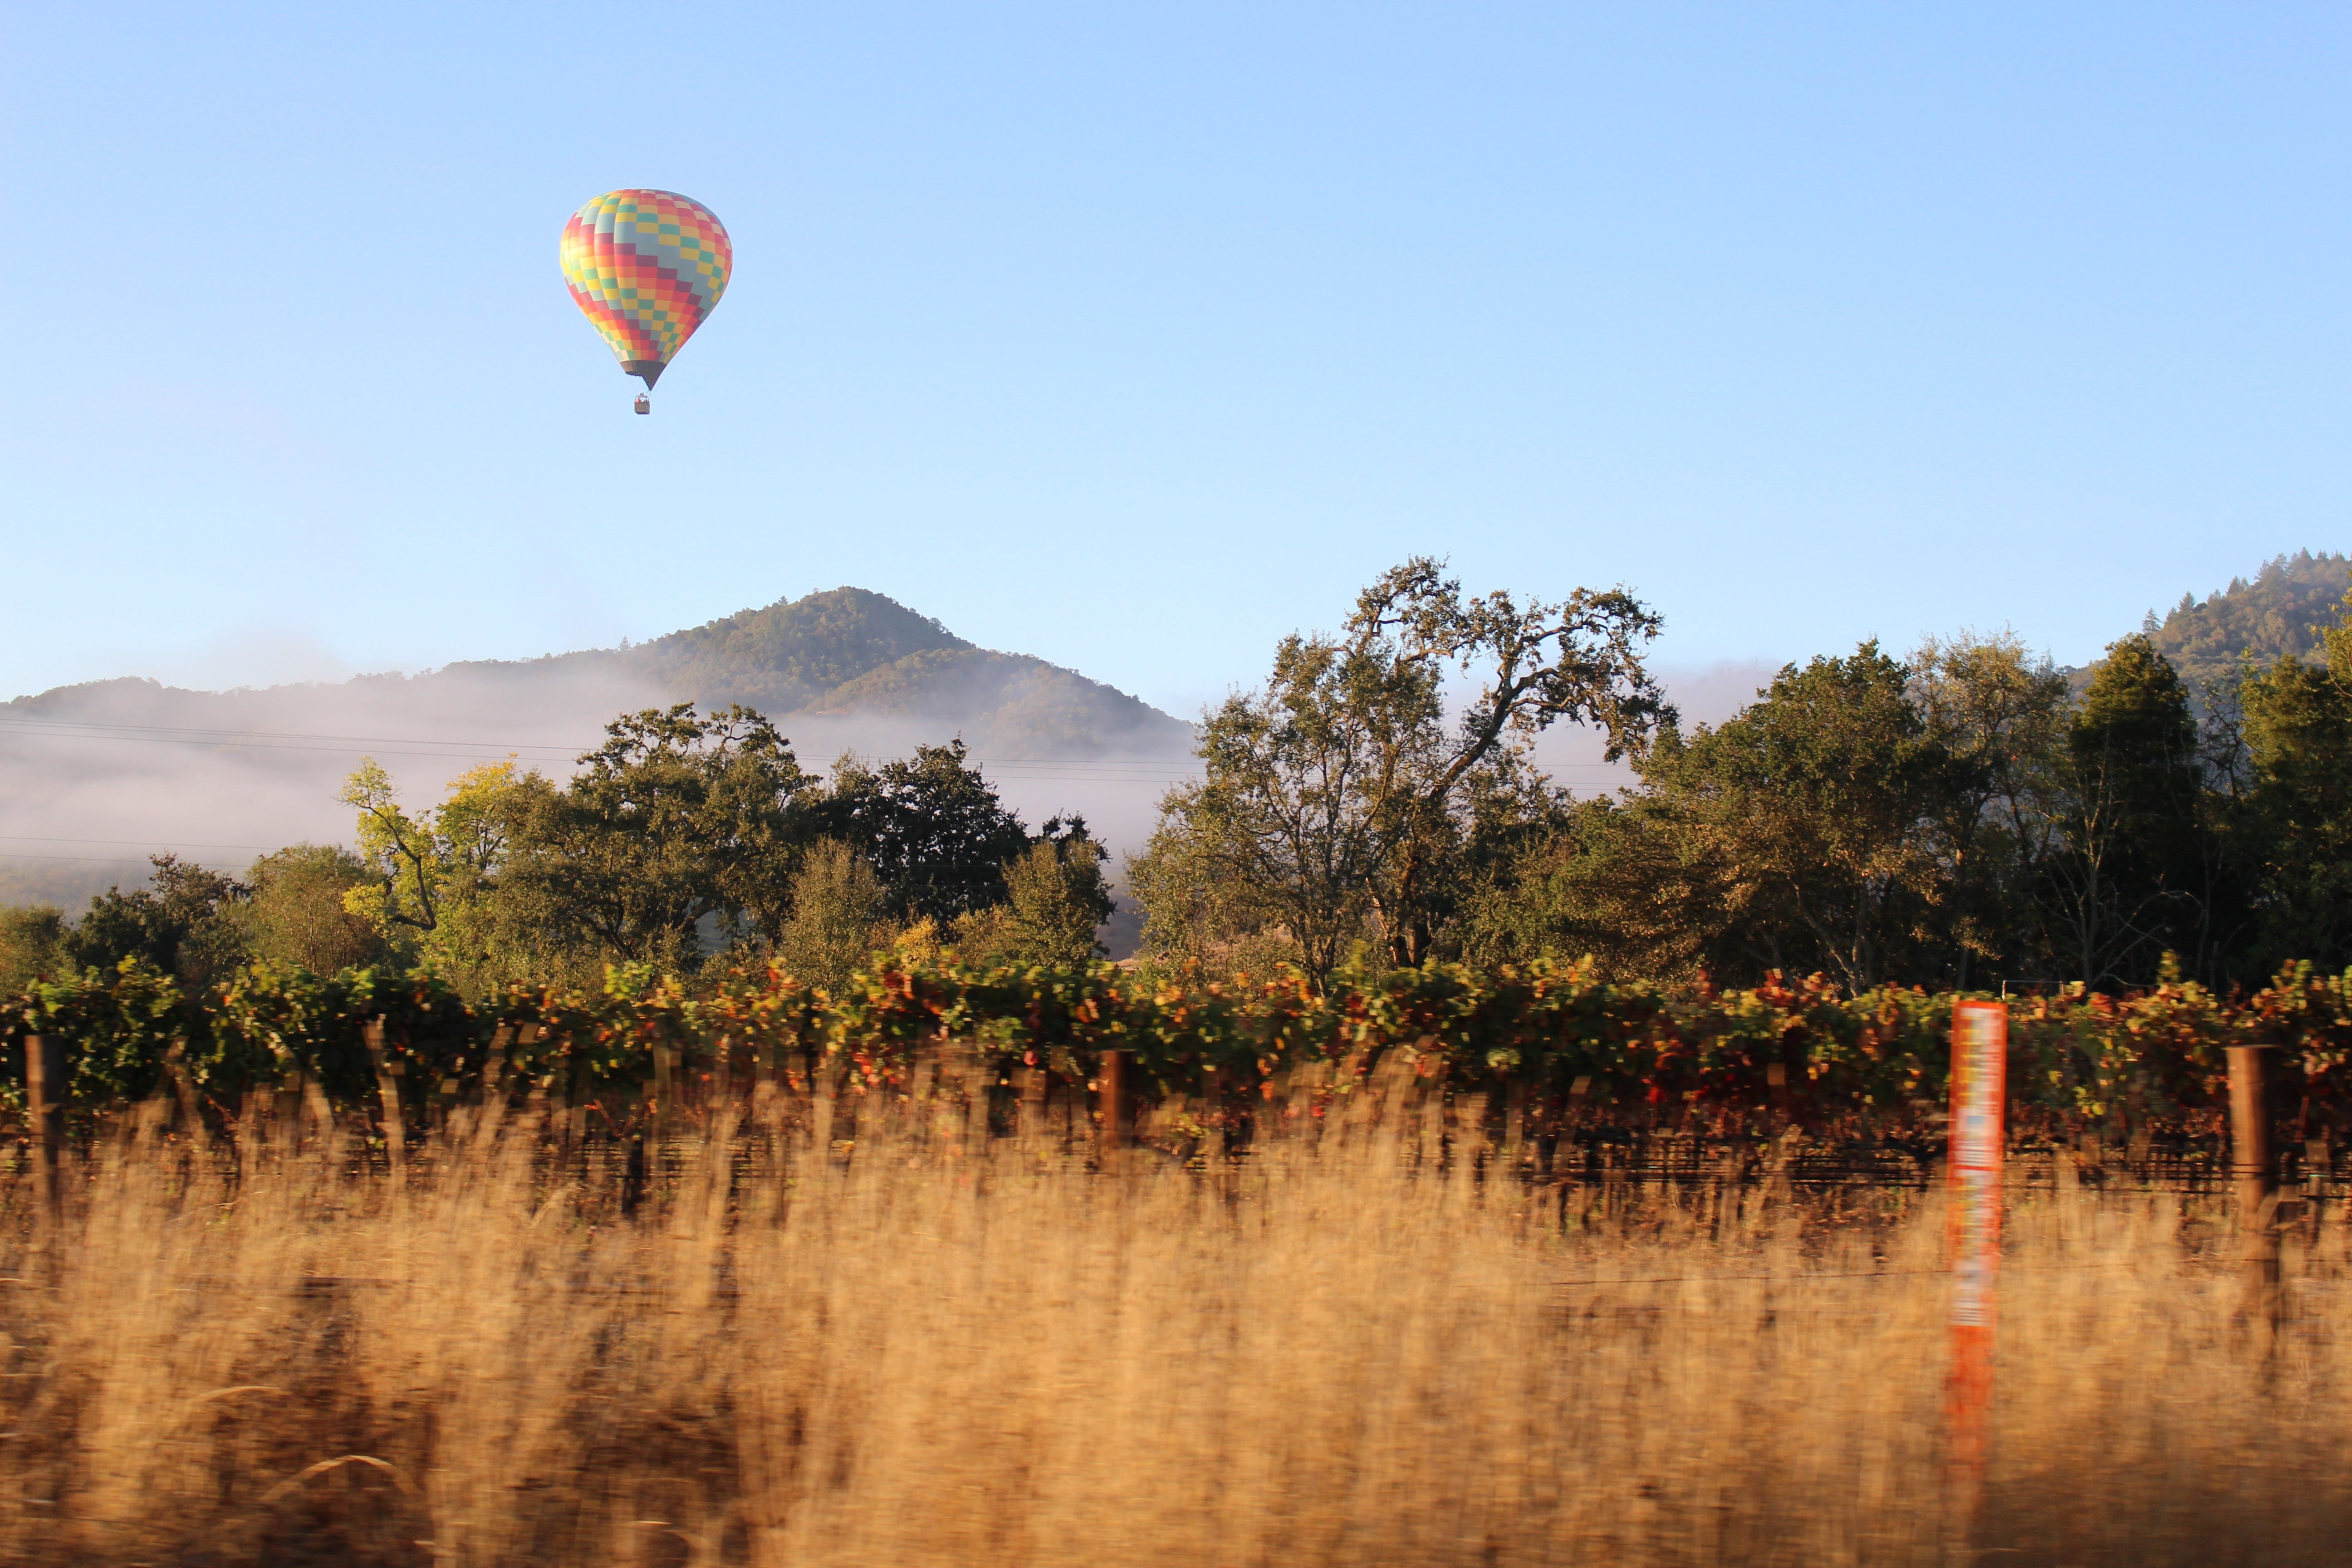 A hot air balloon over the wine fields in Napa Valley.